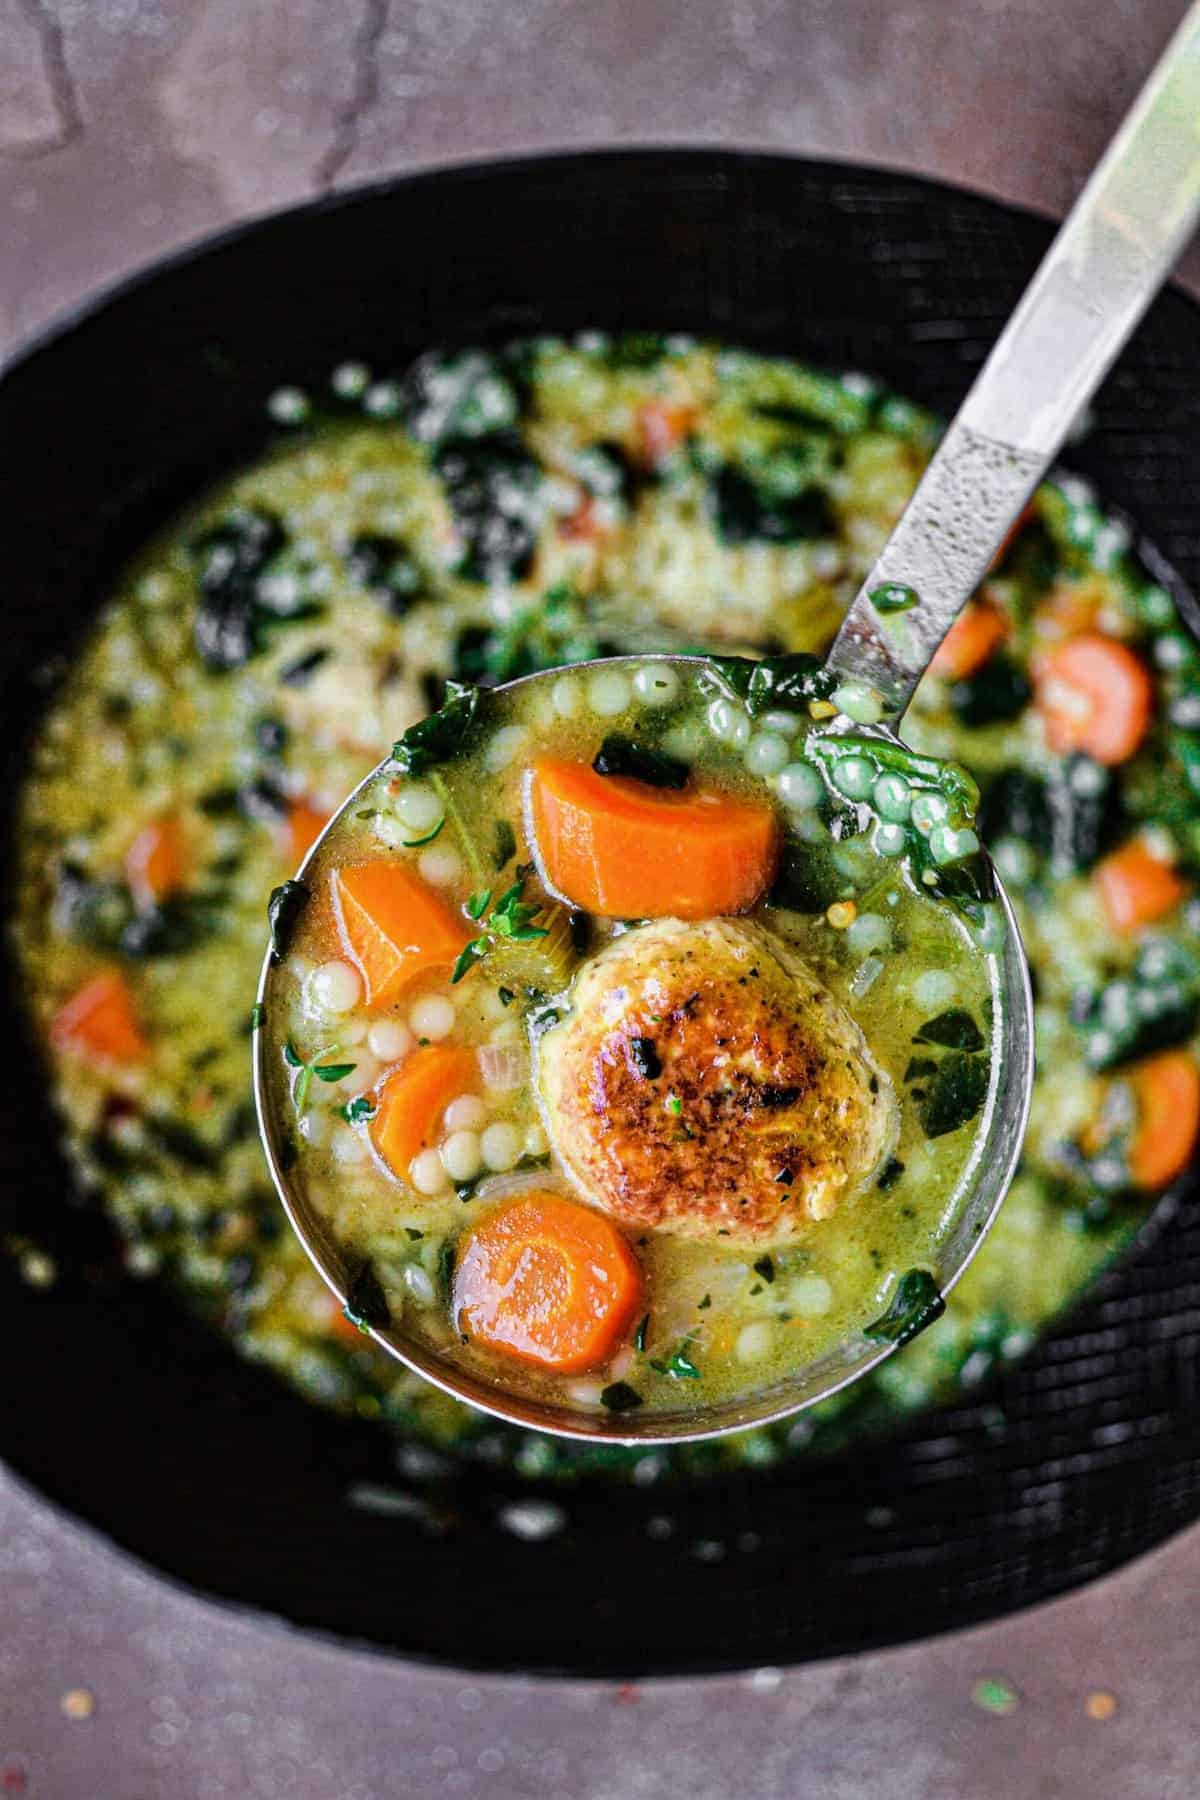 Italian Wedding Soup with chicken meatballs on a spoon held towards camera